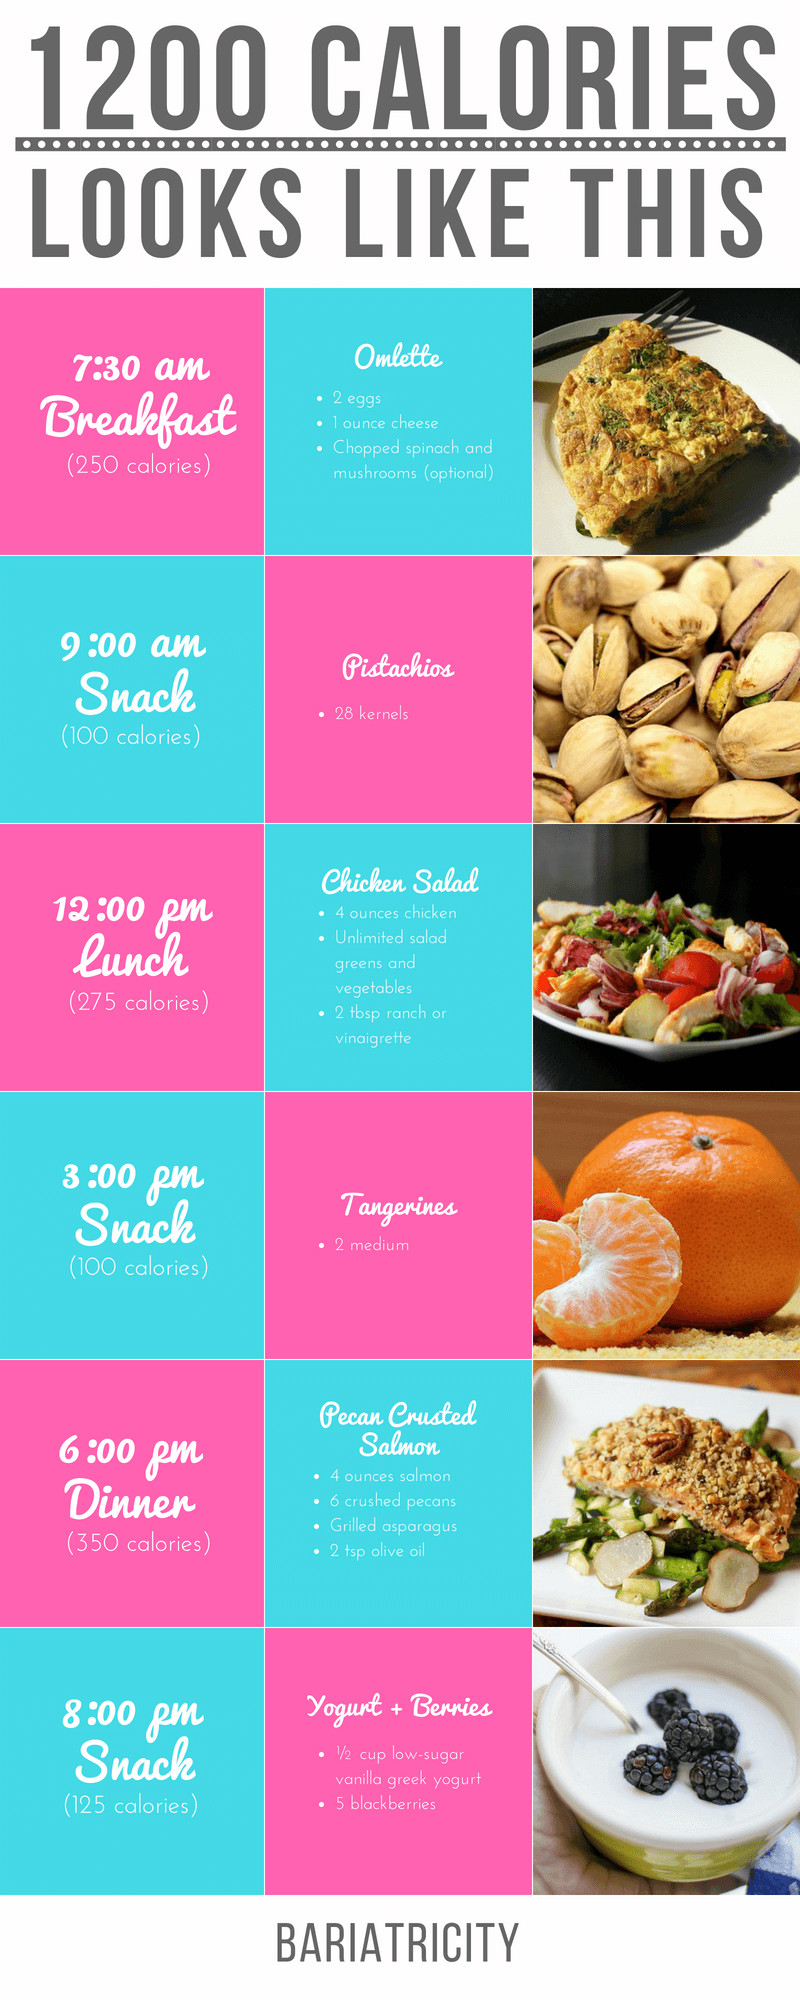 Low Calorie Diet Meal Plan
 1 200 Calories Looks Like This [Diet and Meal Plan